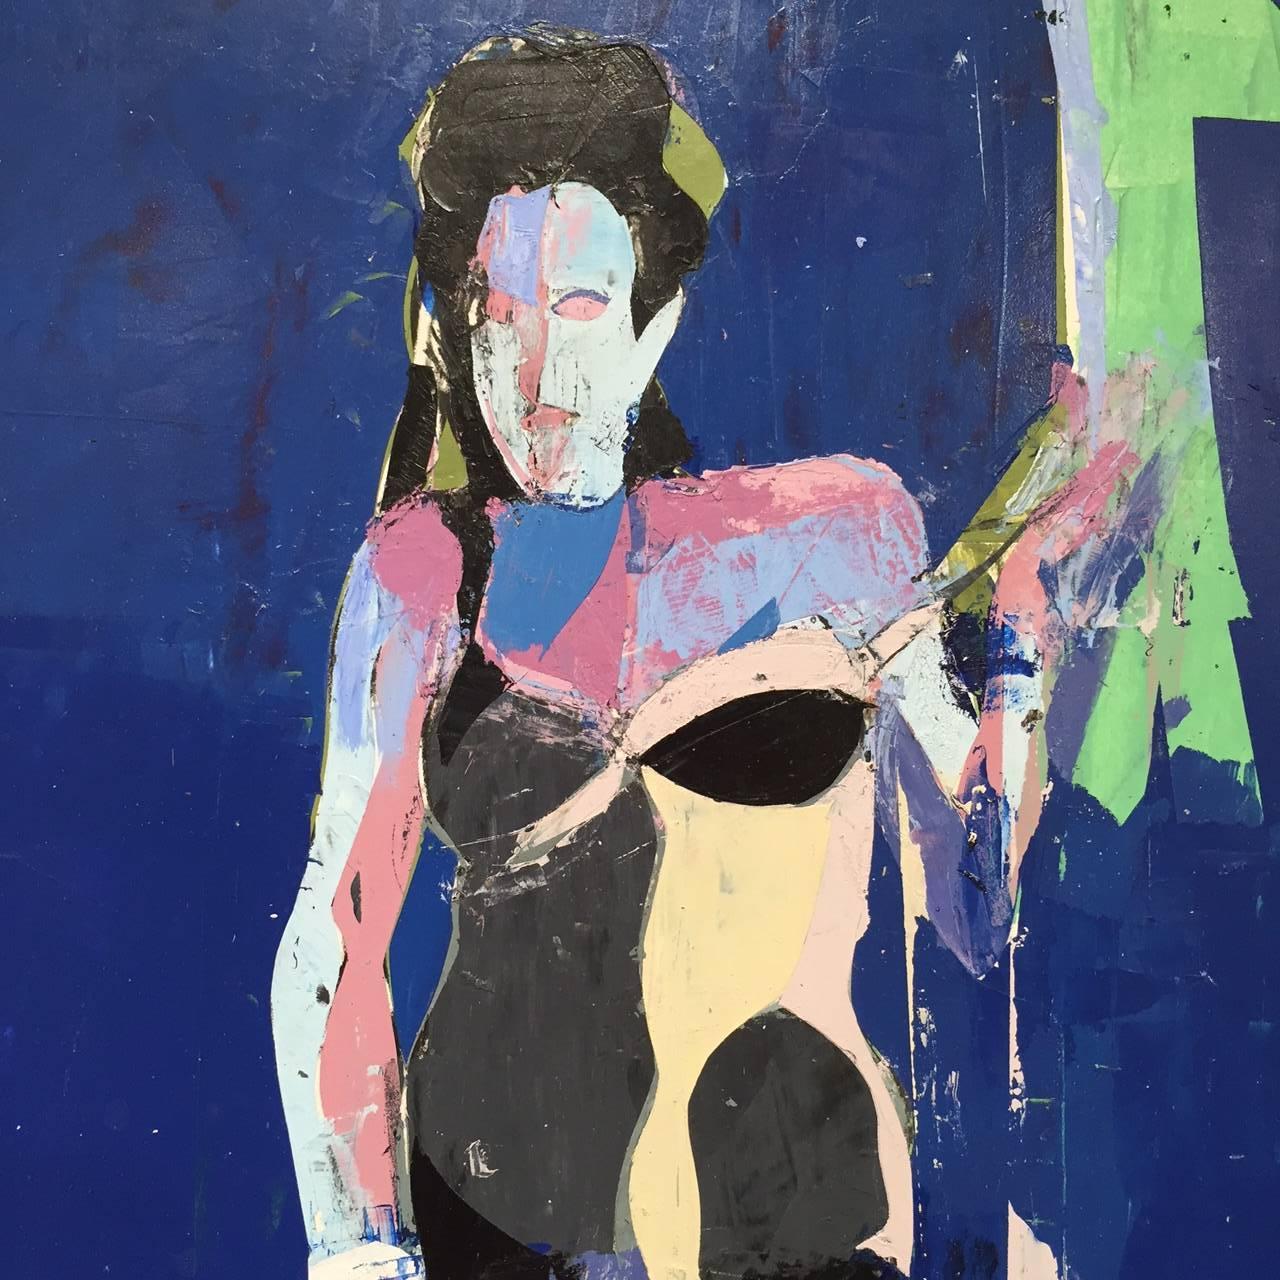 Abstract figurative nude painting in cobalt and electric blue and pink, from Kim Frohsin's 